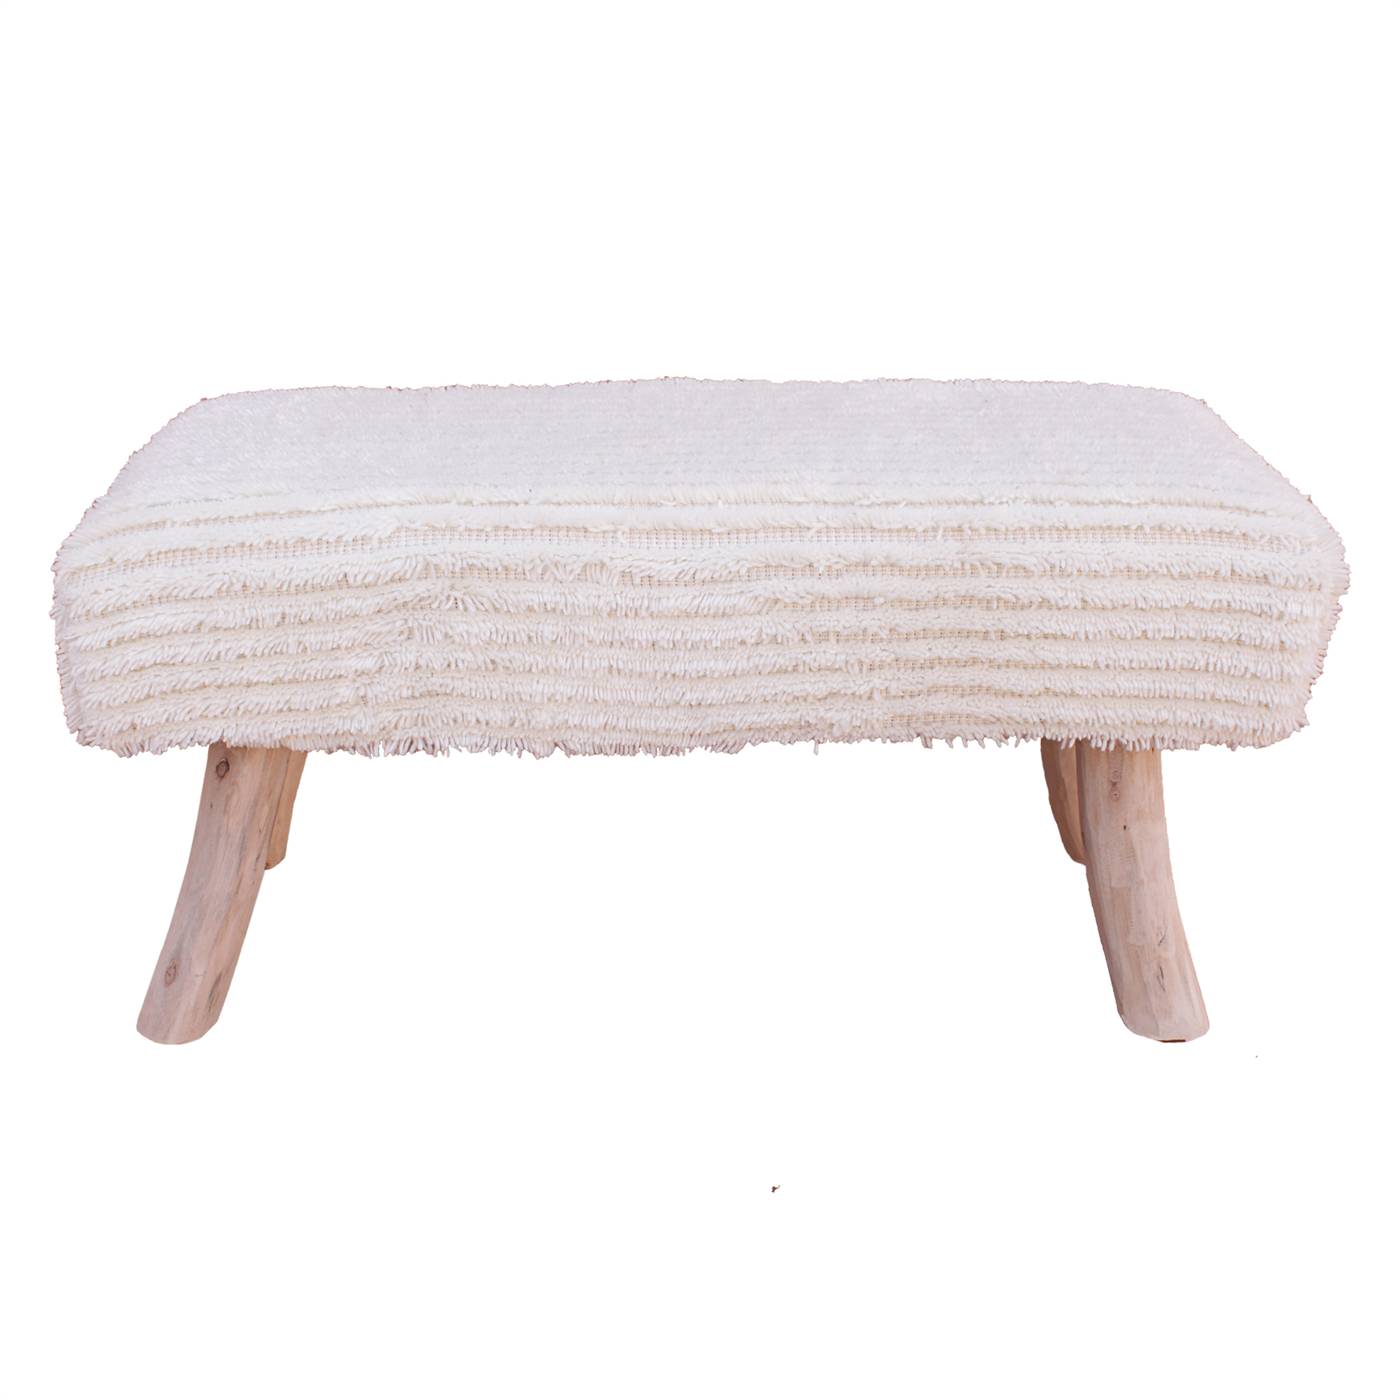 Burks Bench, 80x30x40 cm, Natural White, Wool, Hand Woven, Handwoven, All Cut